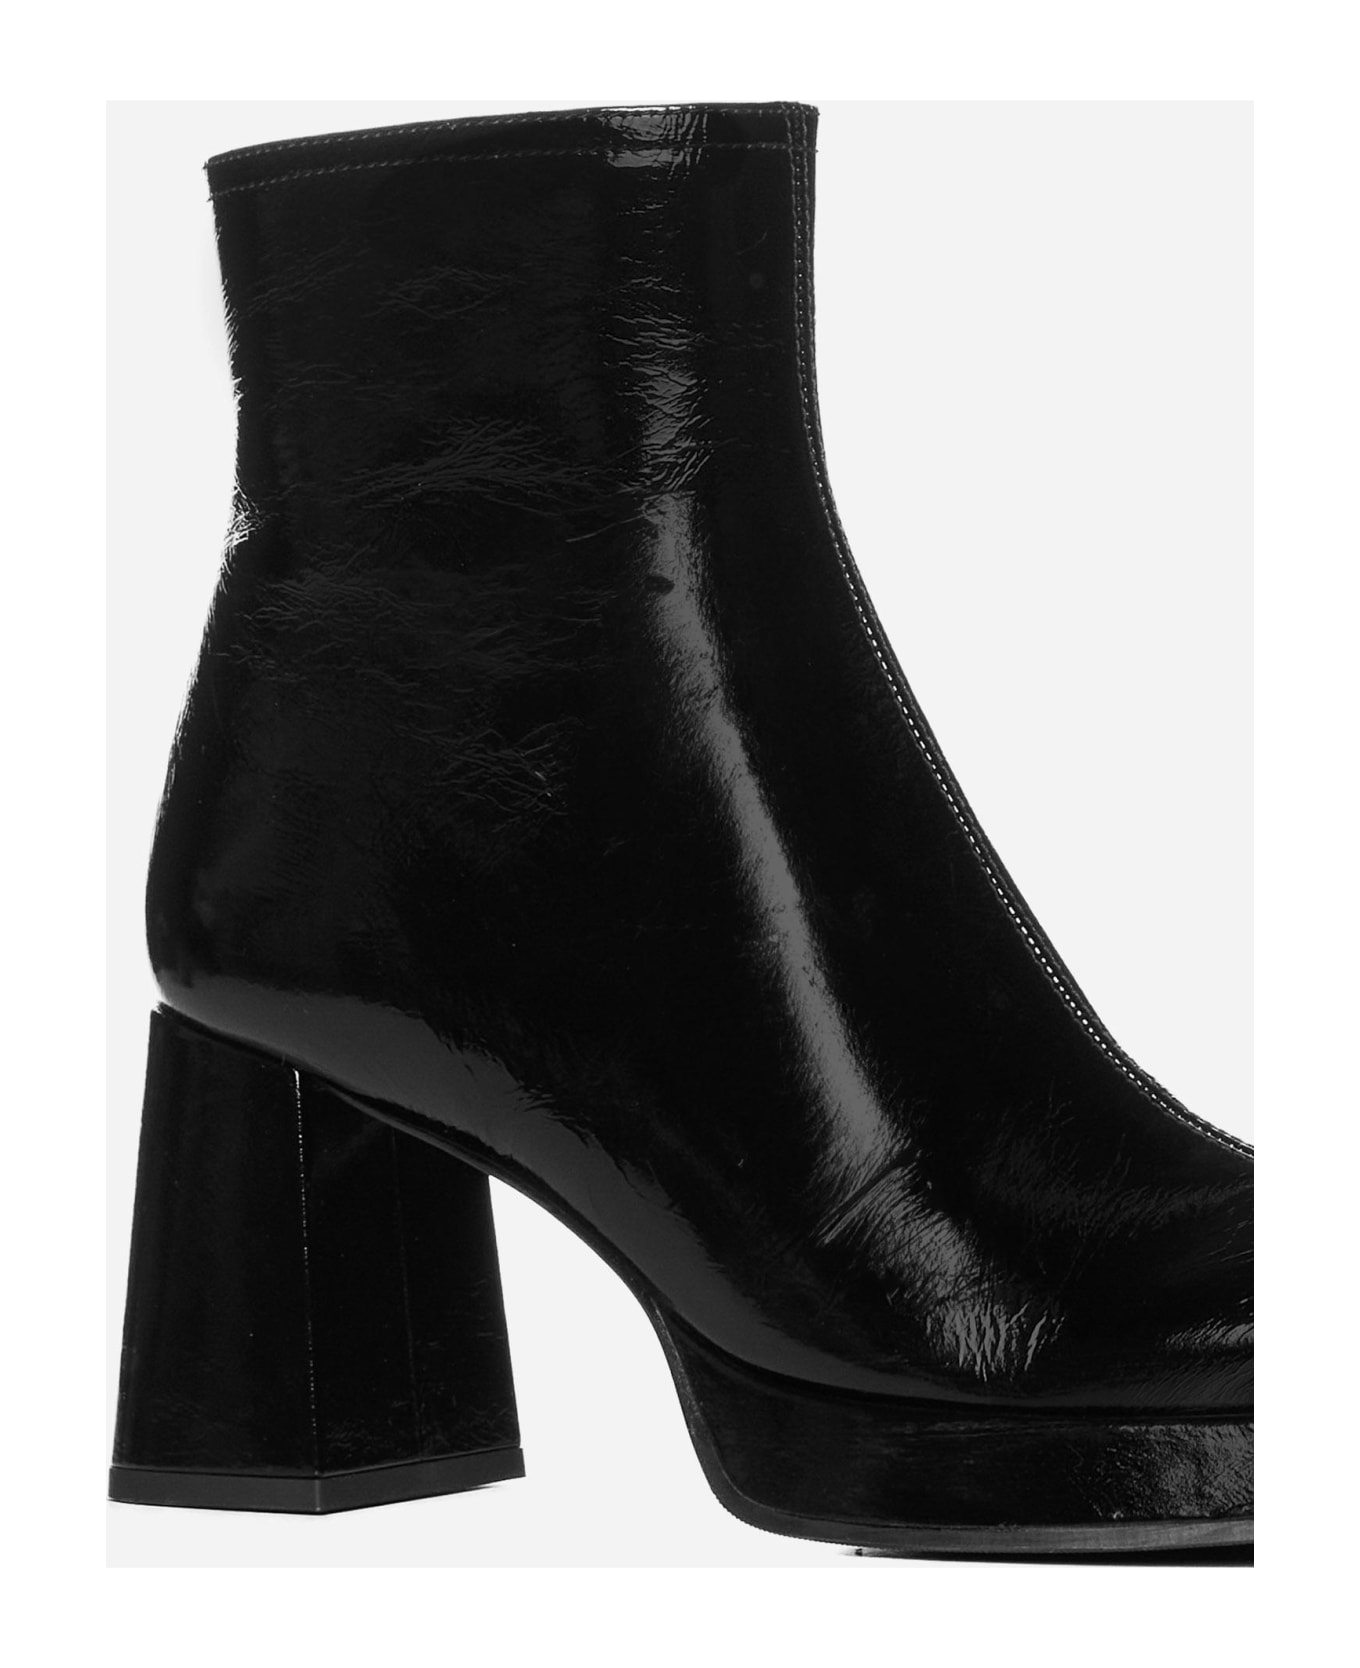 Chie Mihara Katrin Patent Leather Ankle Boots - Negro